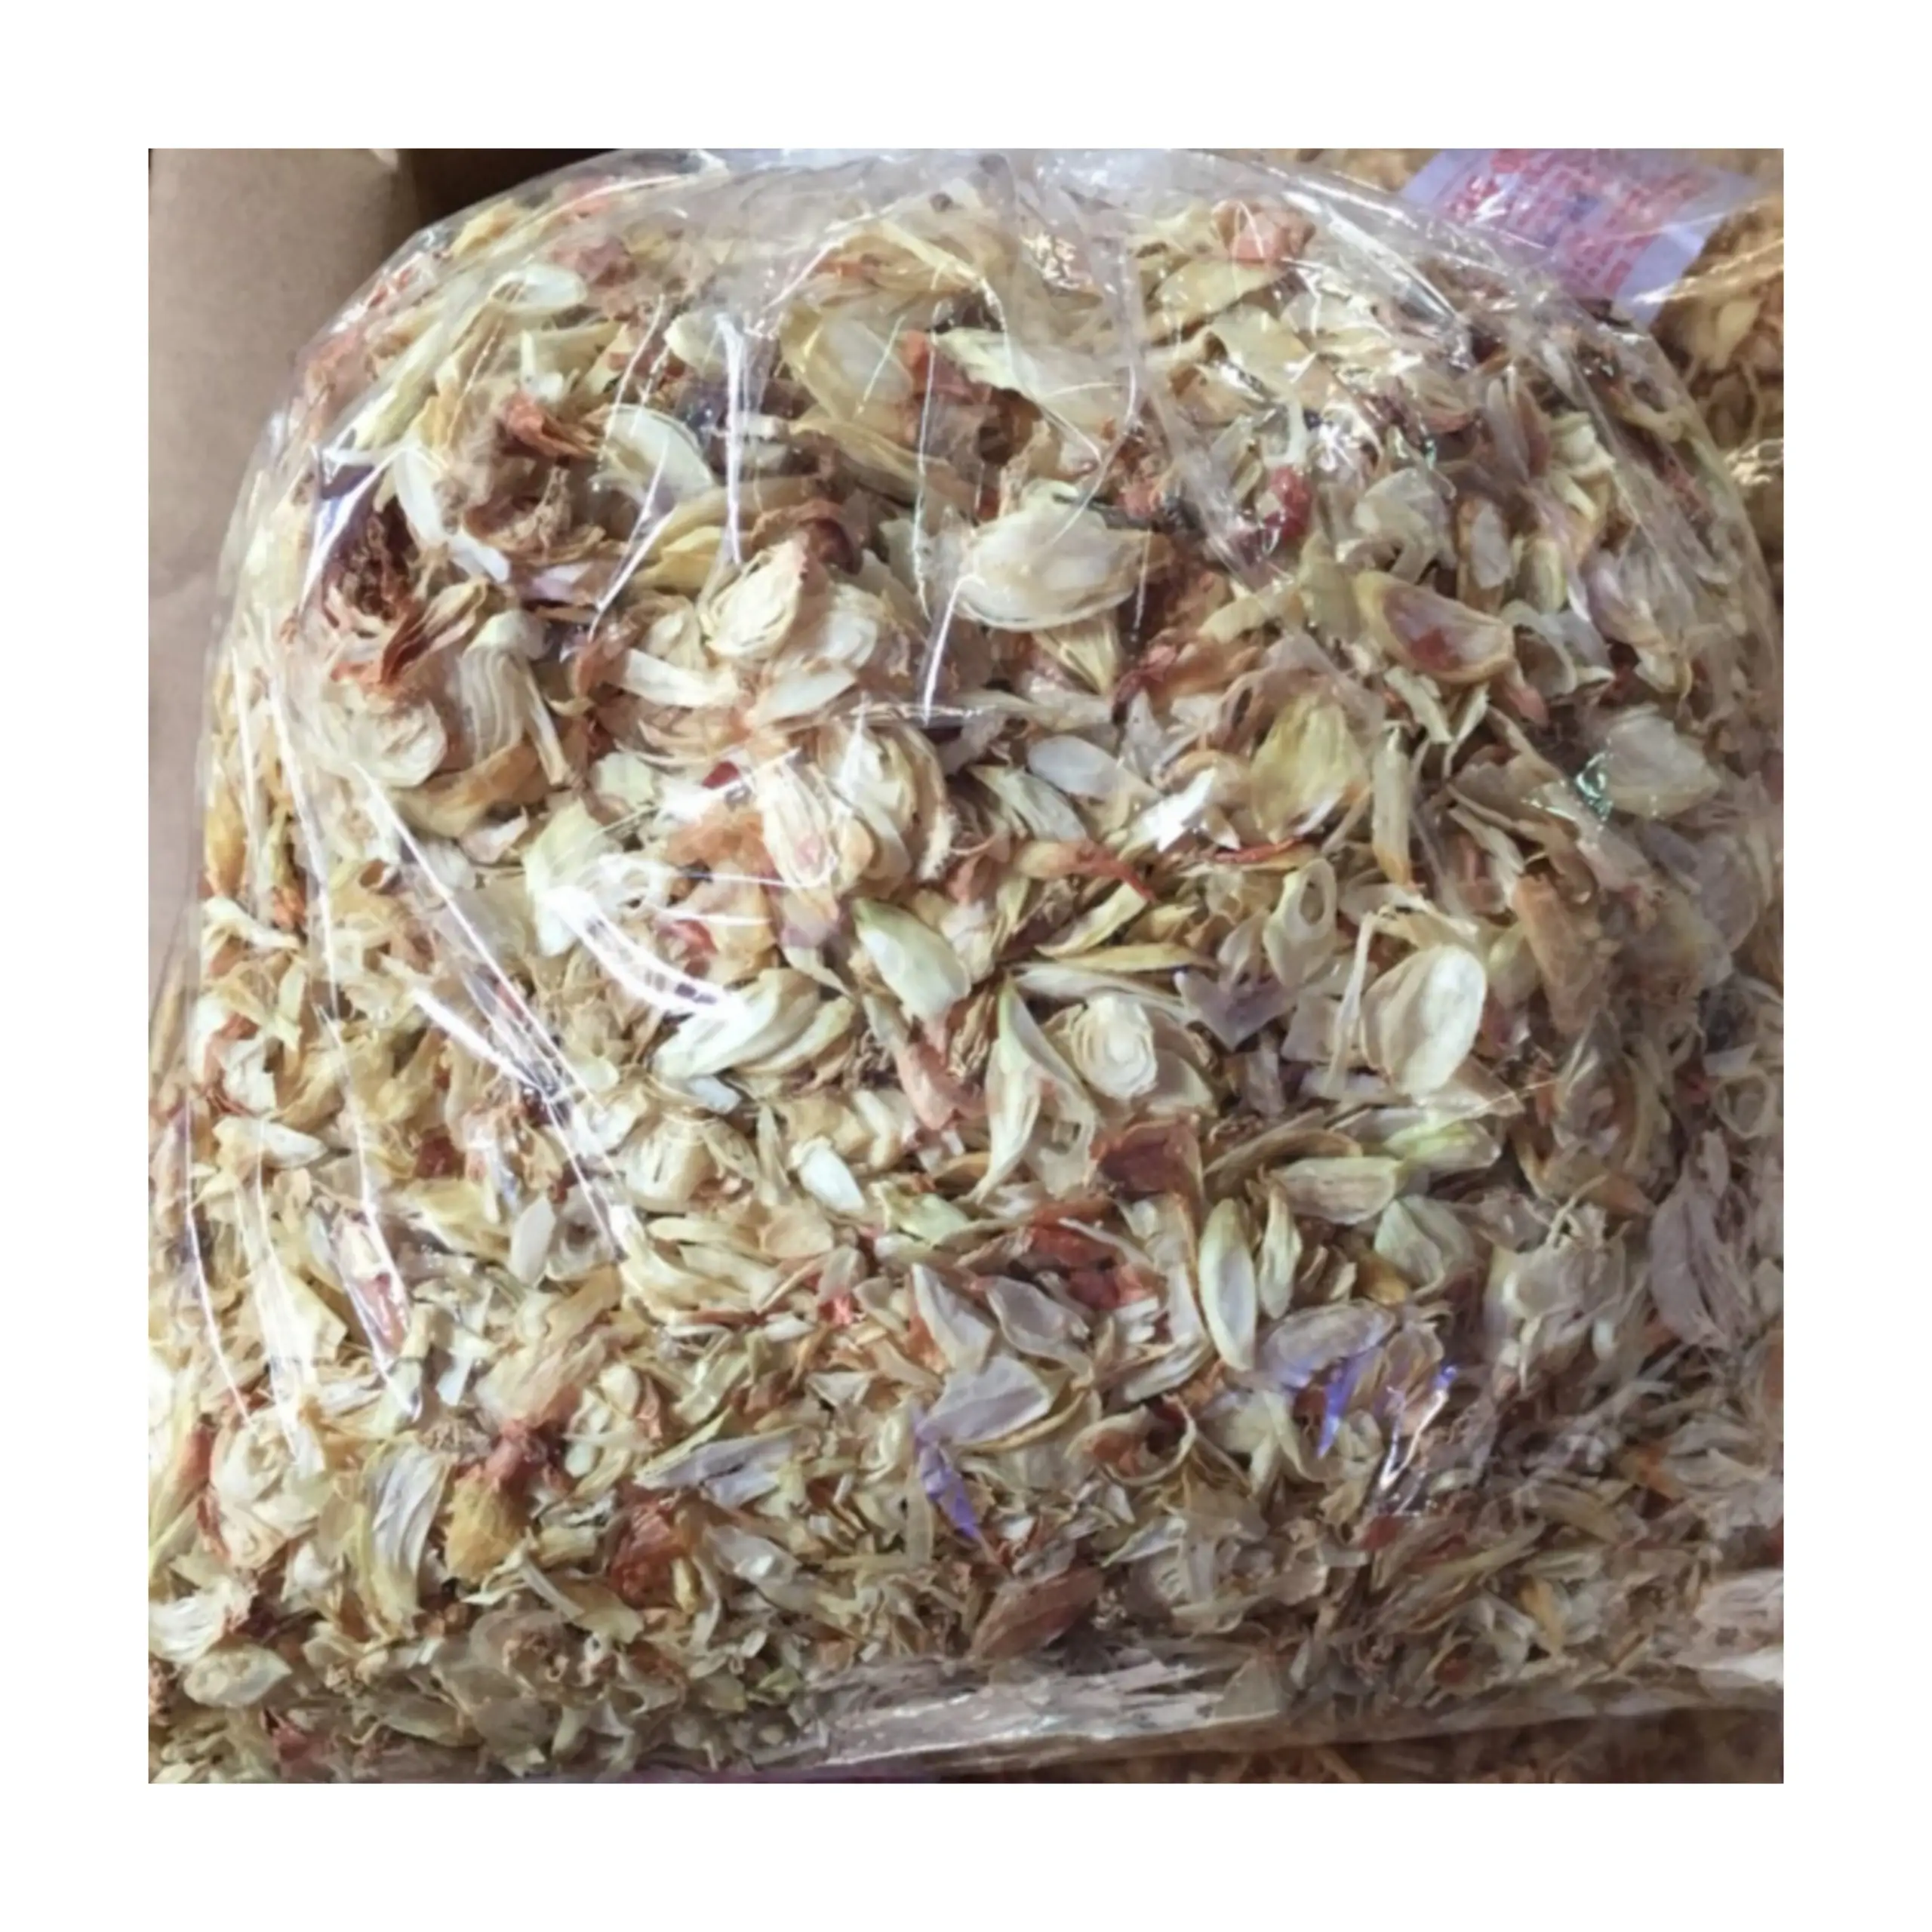 Buy dried shallot red onion now for best price/ we supply high quality dried red onion 99 Gold Data